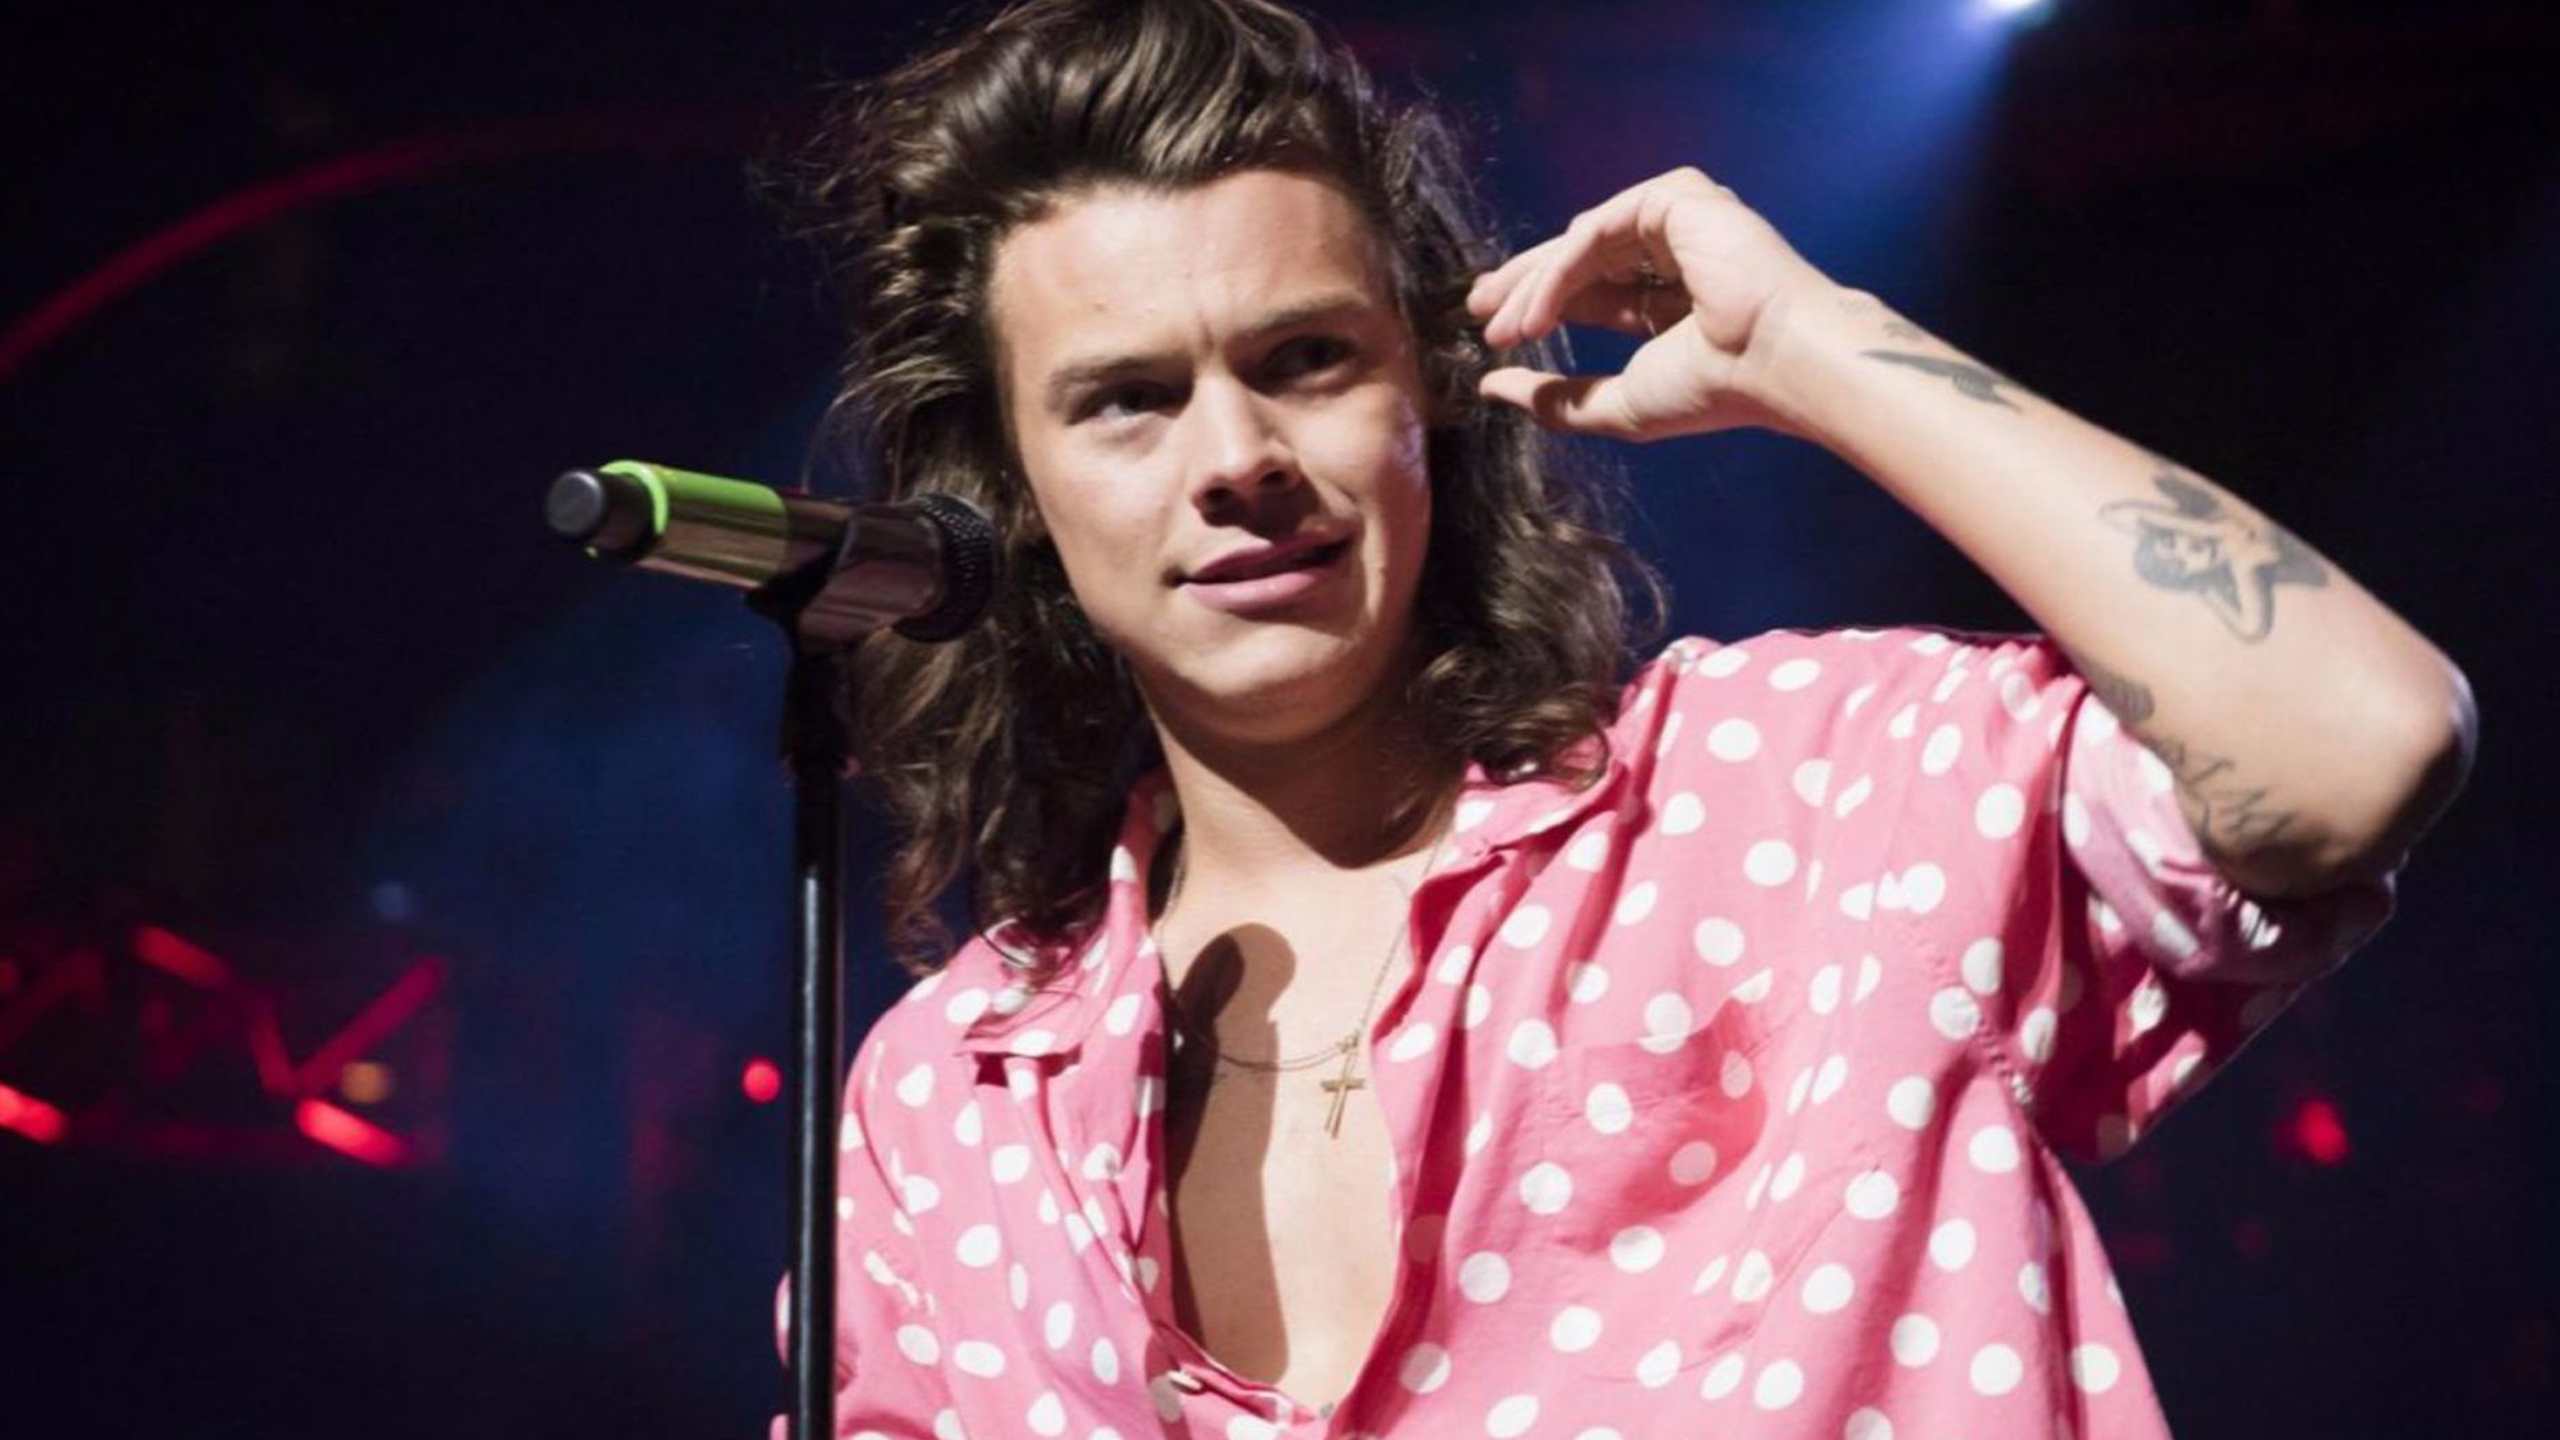 Harry Styles Is Wearing Pink With White Round Shirt Having Chain On Neck 2K Harry Styles